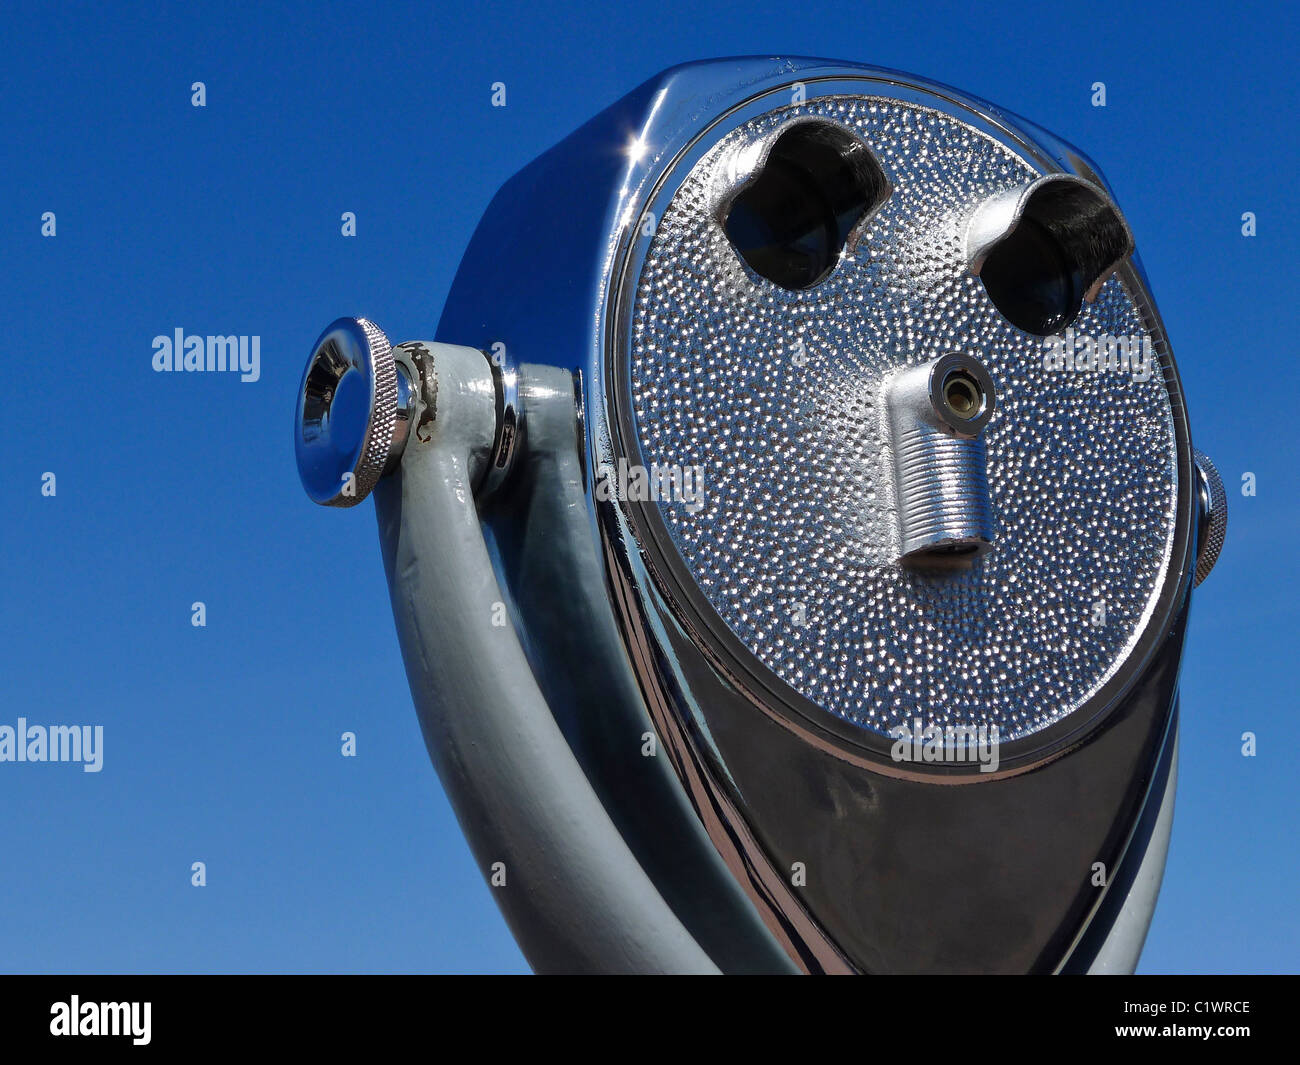 Sightseeing tourist viewer against blue sky. Stock Photo